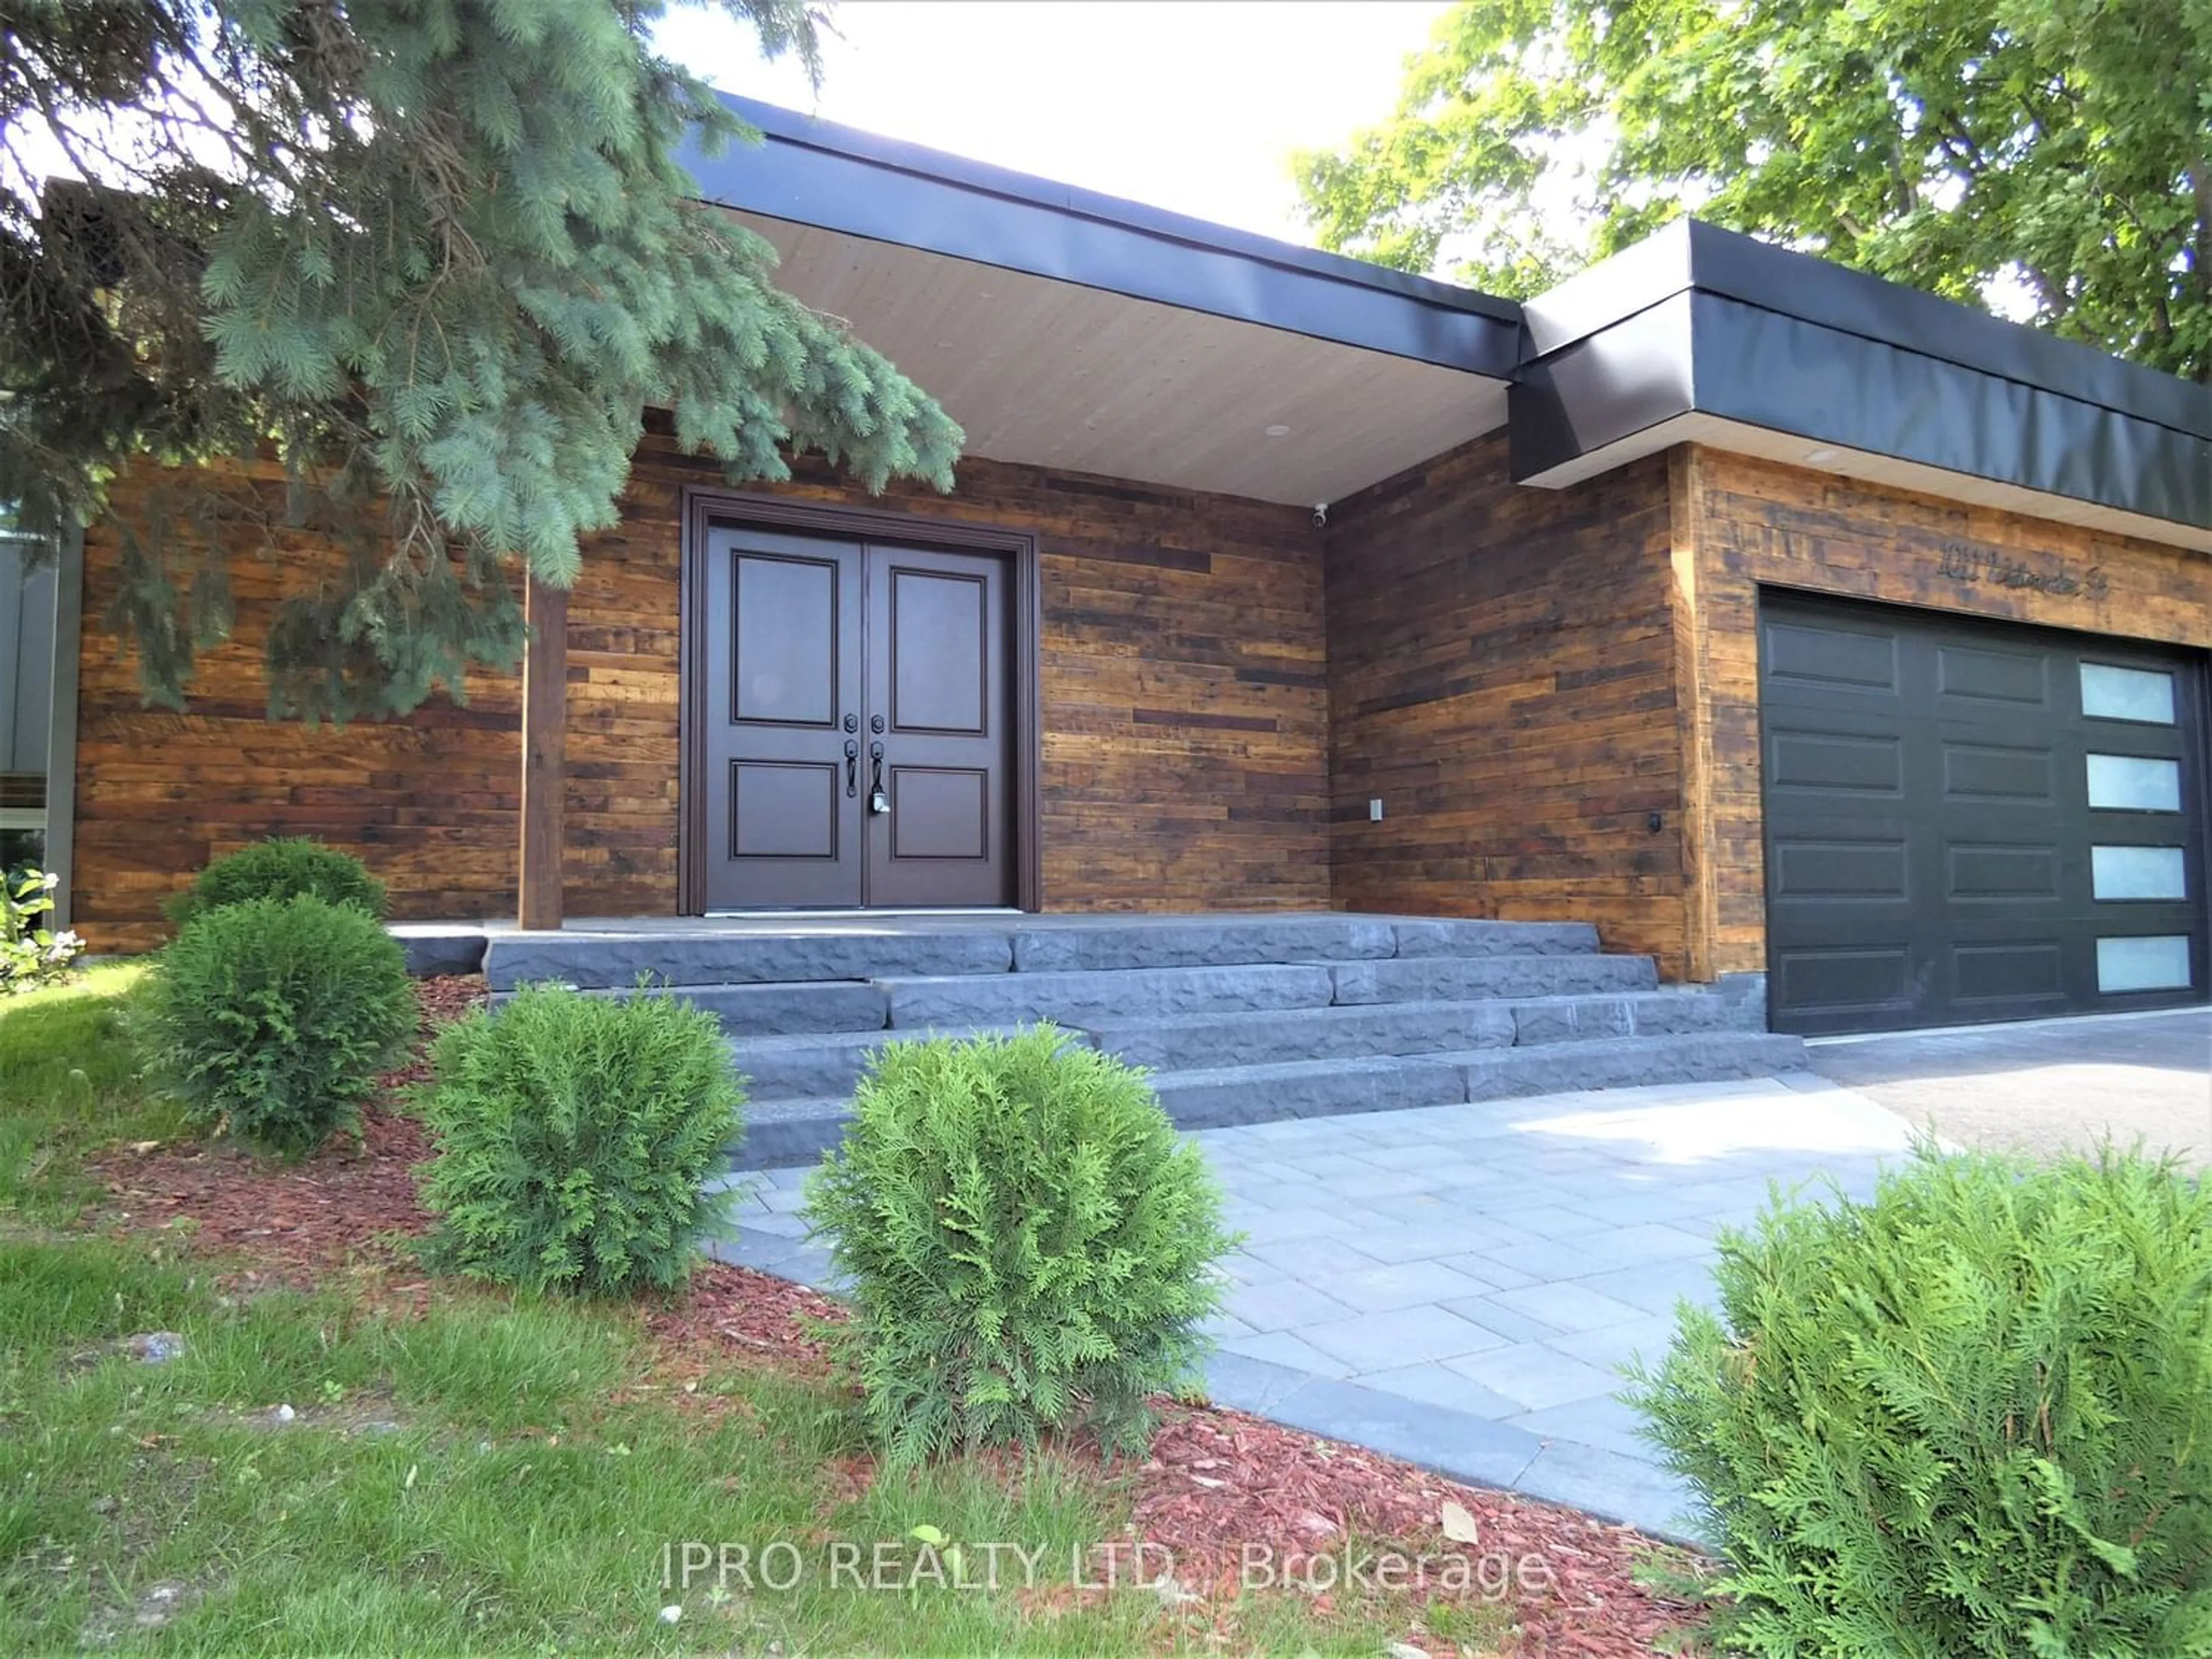 Home with brick exterior material for 1011 Westminister St, Innisfil Ontario L9S 1T8